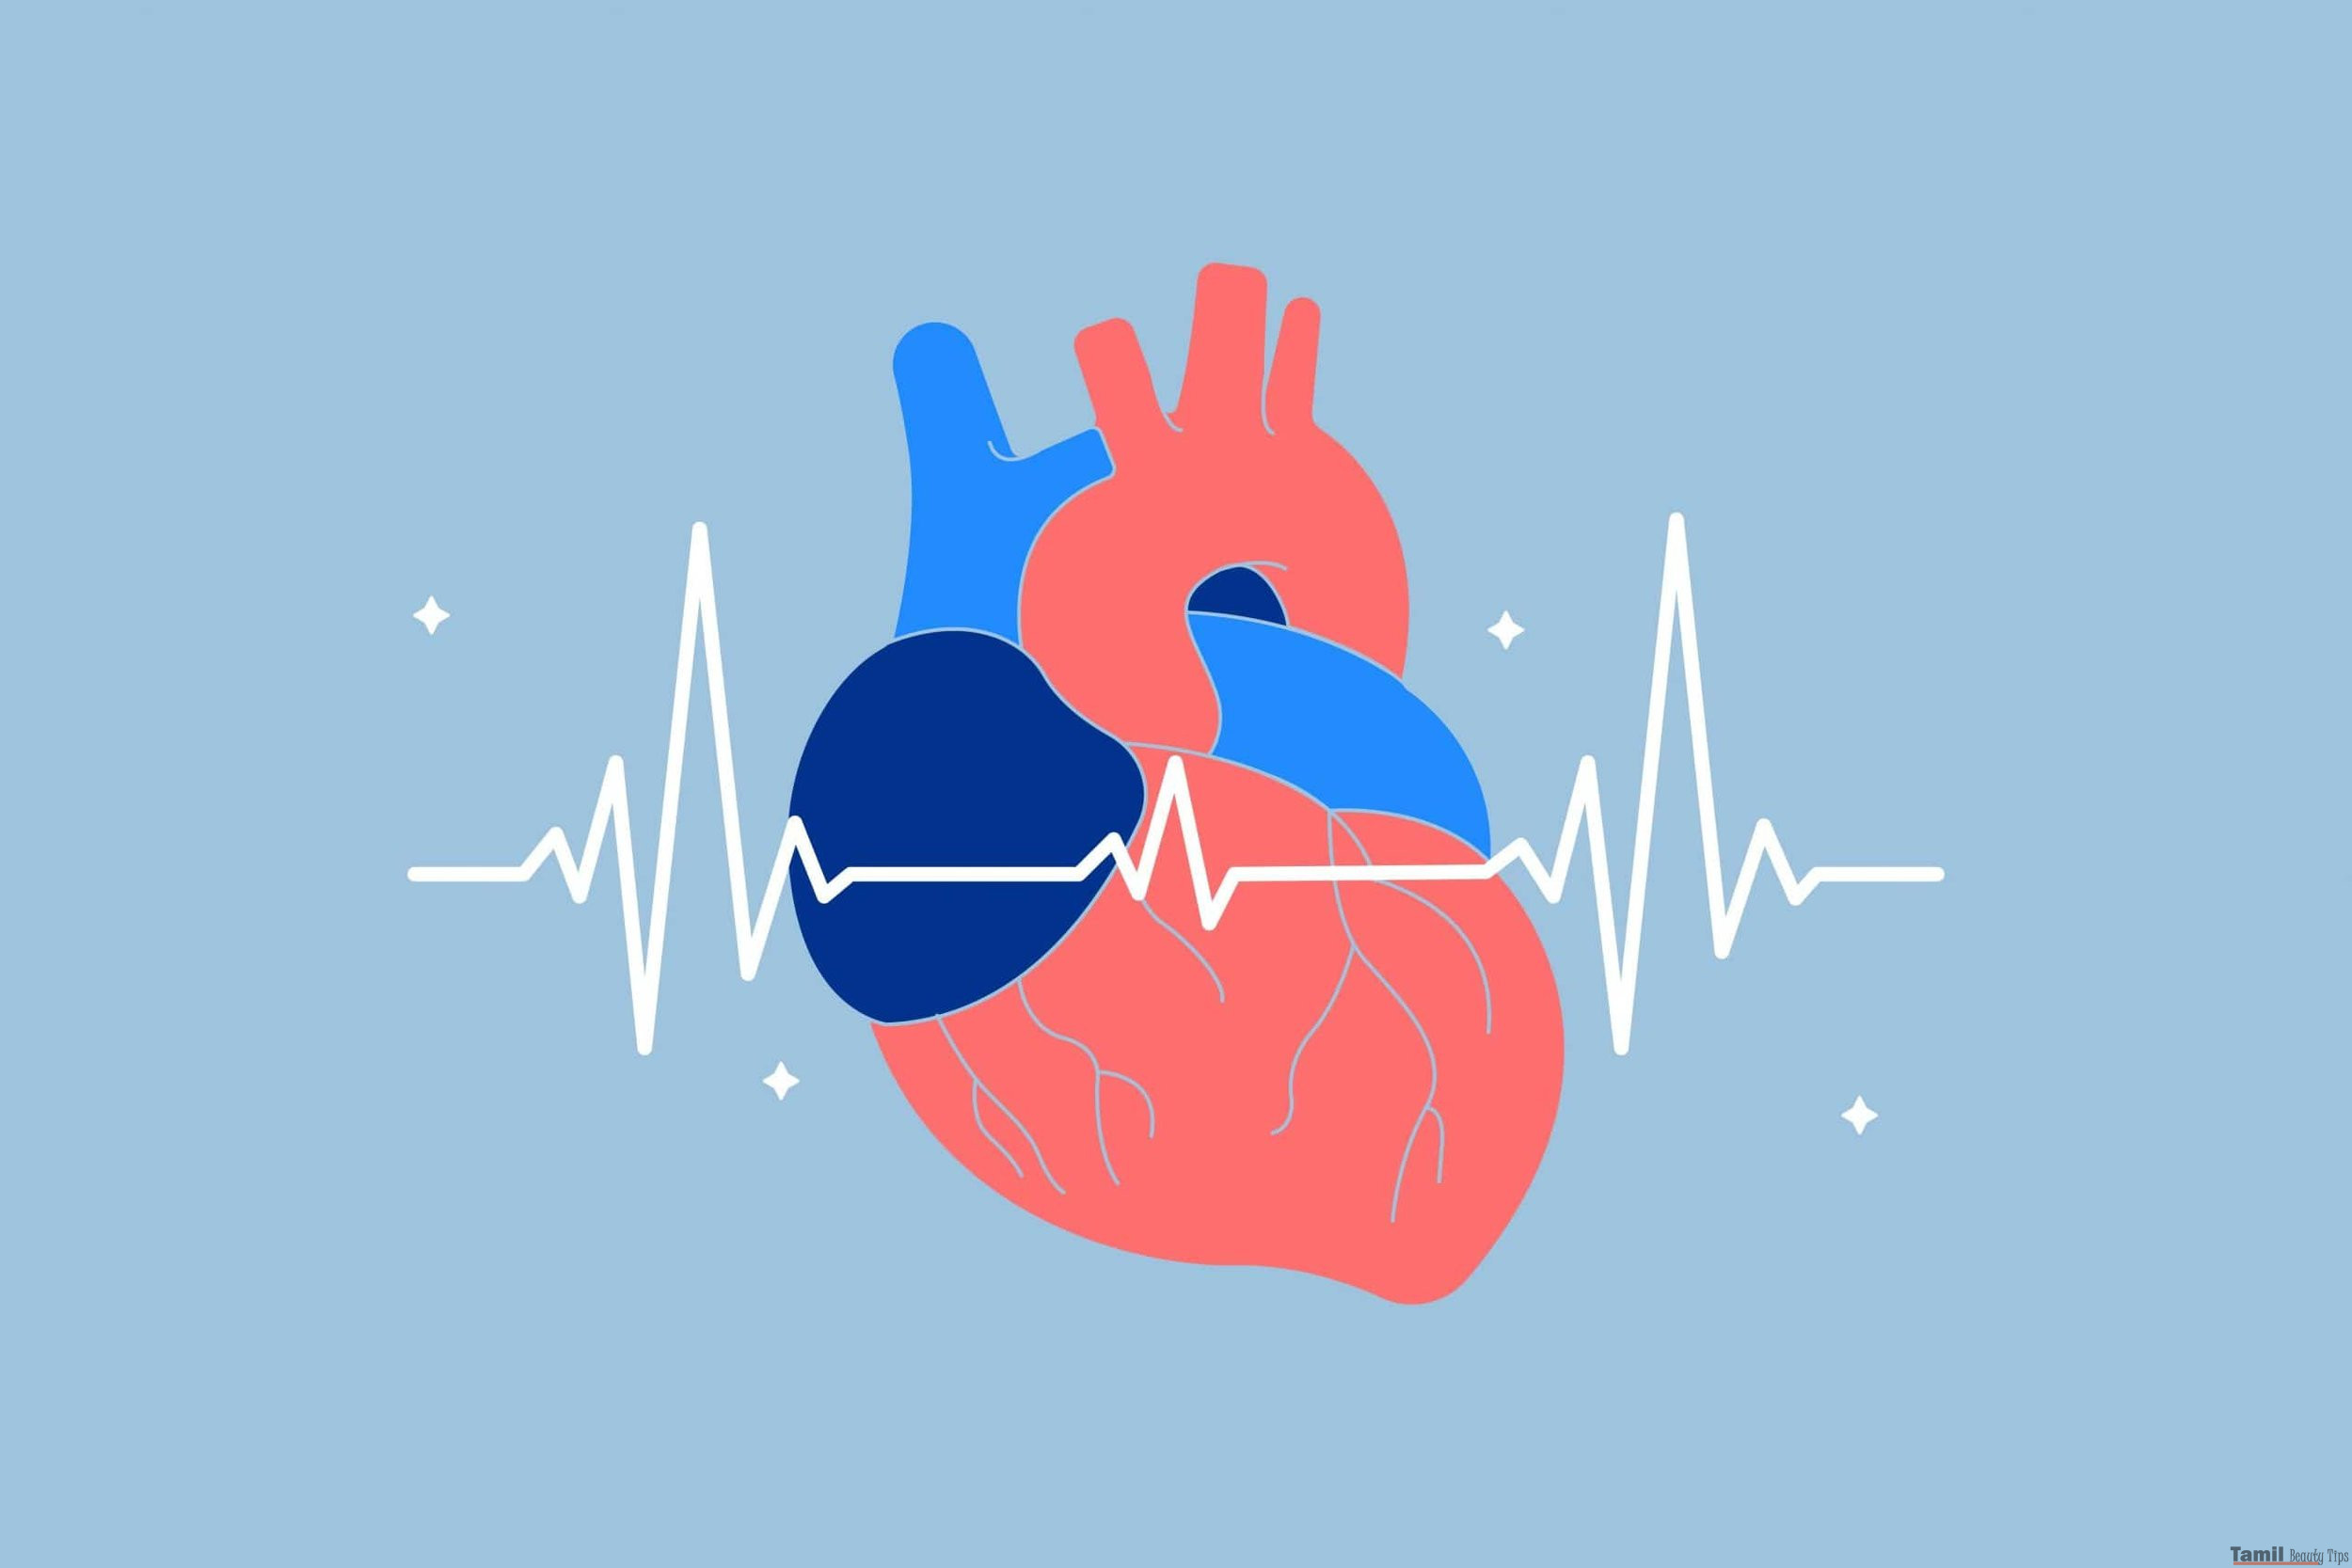 proven strategies boost heart rate variability hrv improve improvement enhance best ways how to tips best practices increase increasing techniques exercises enhancement natural lifestyle cha